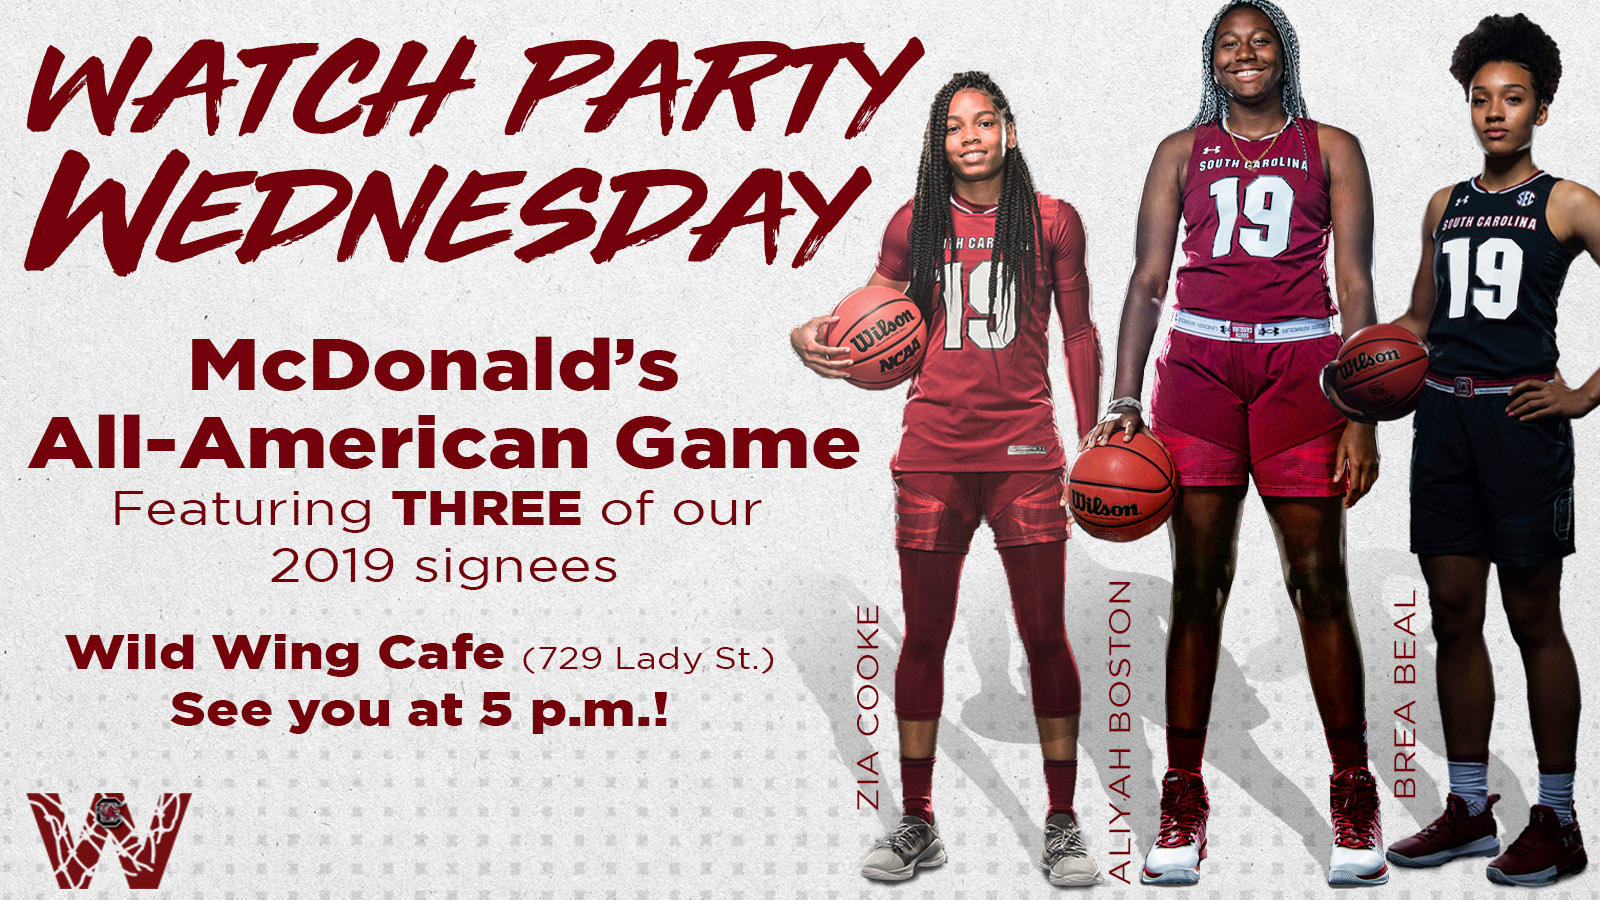 McDonald's All-America Watch Party at Wild Wing Cafe Wednesday